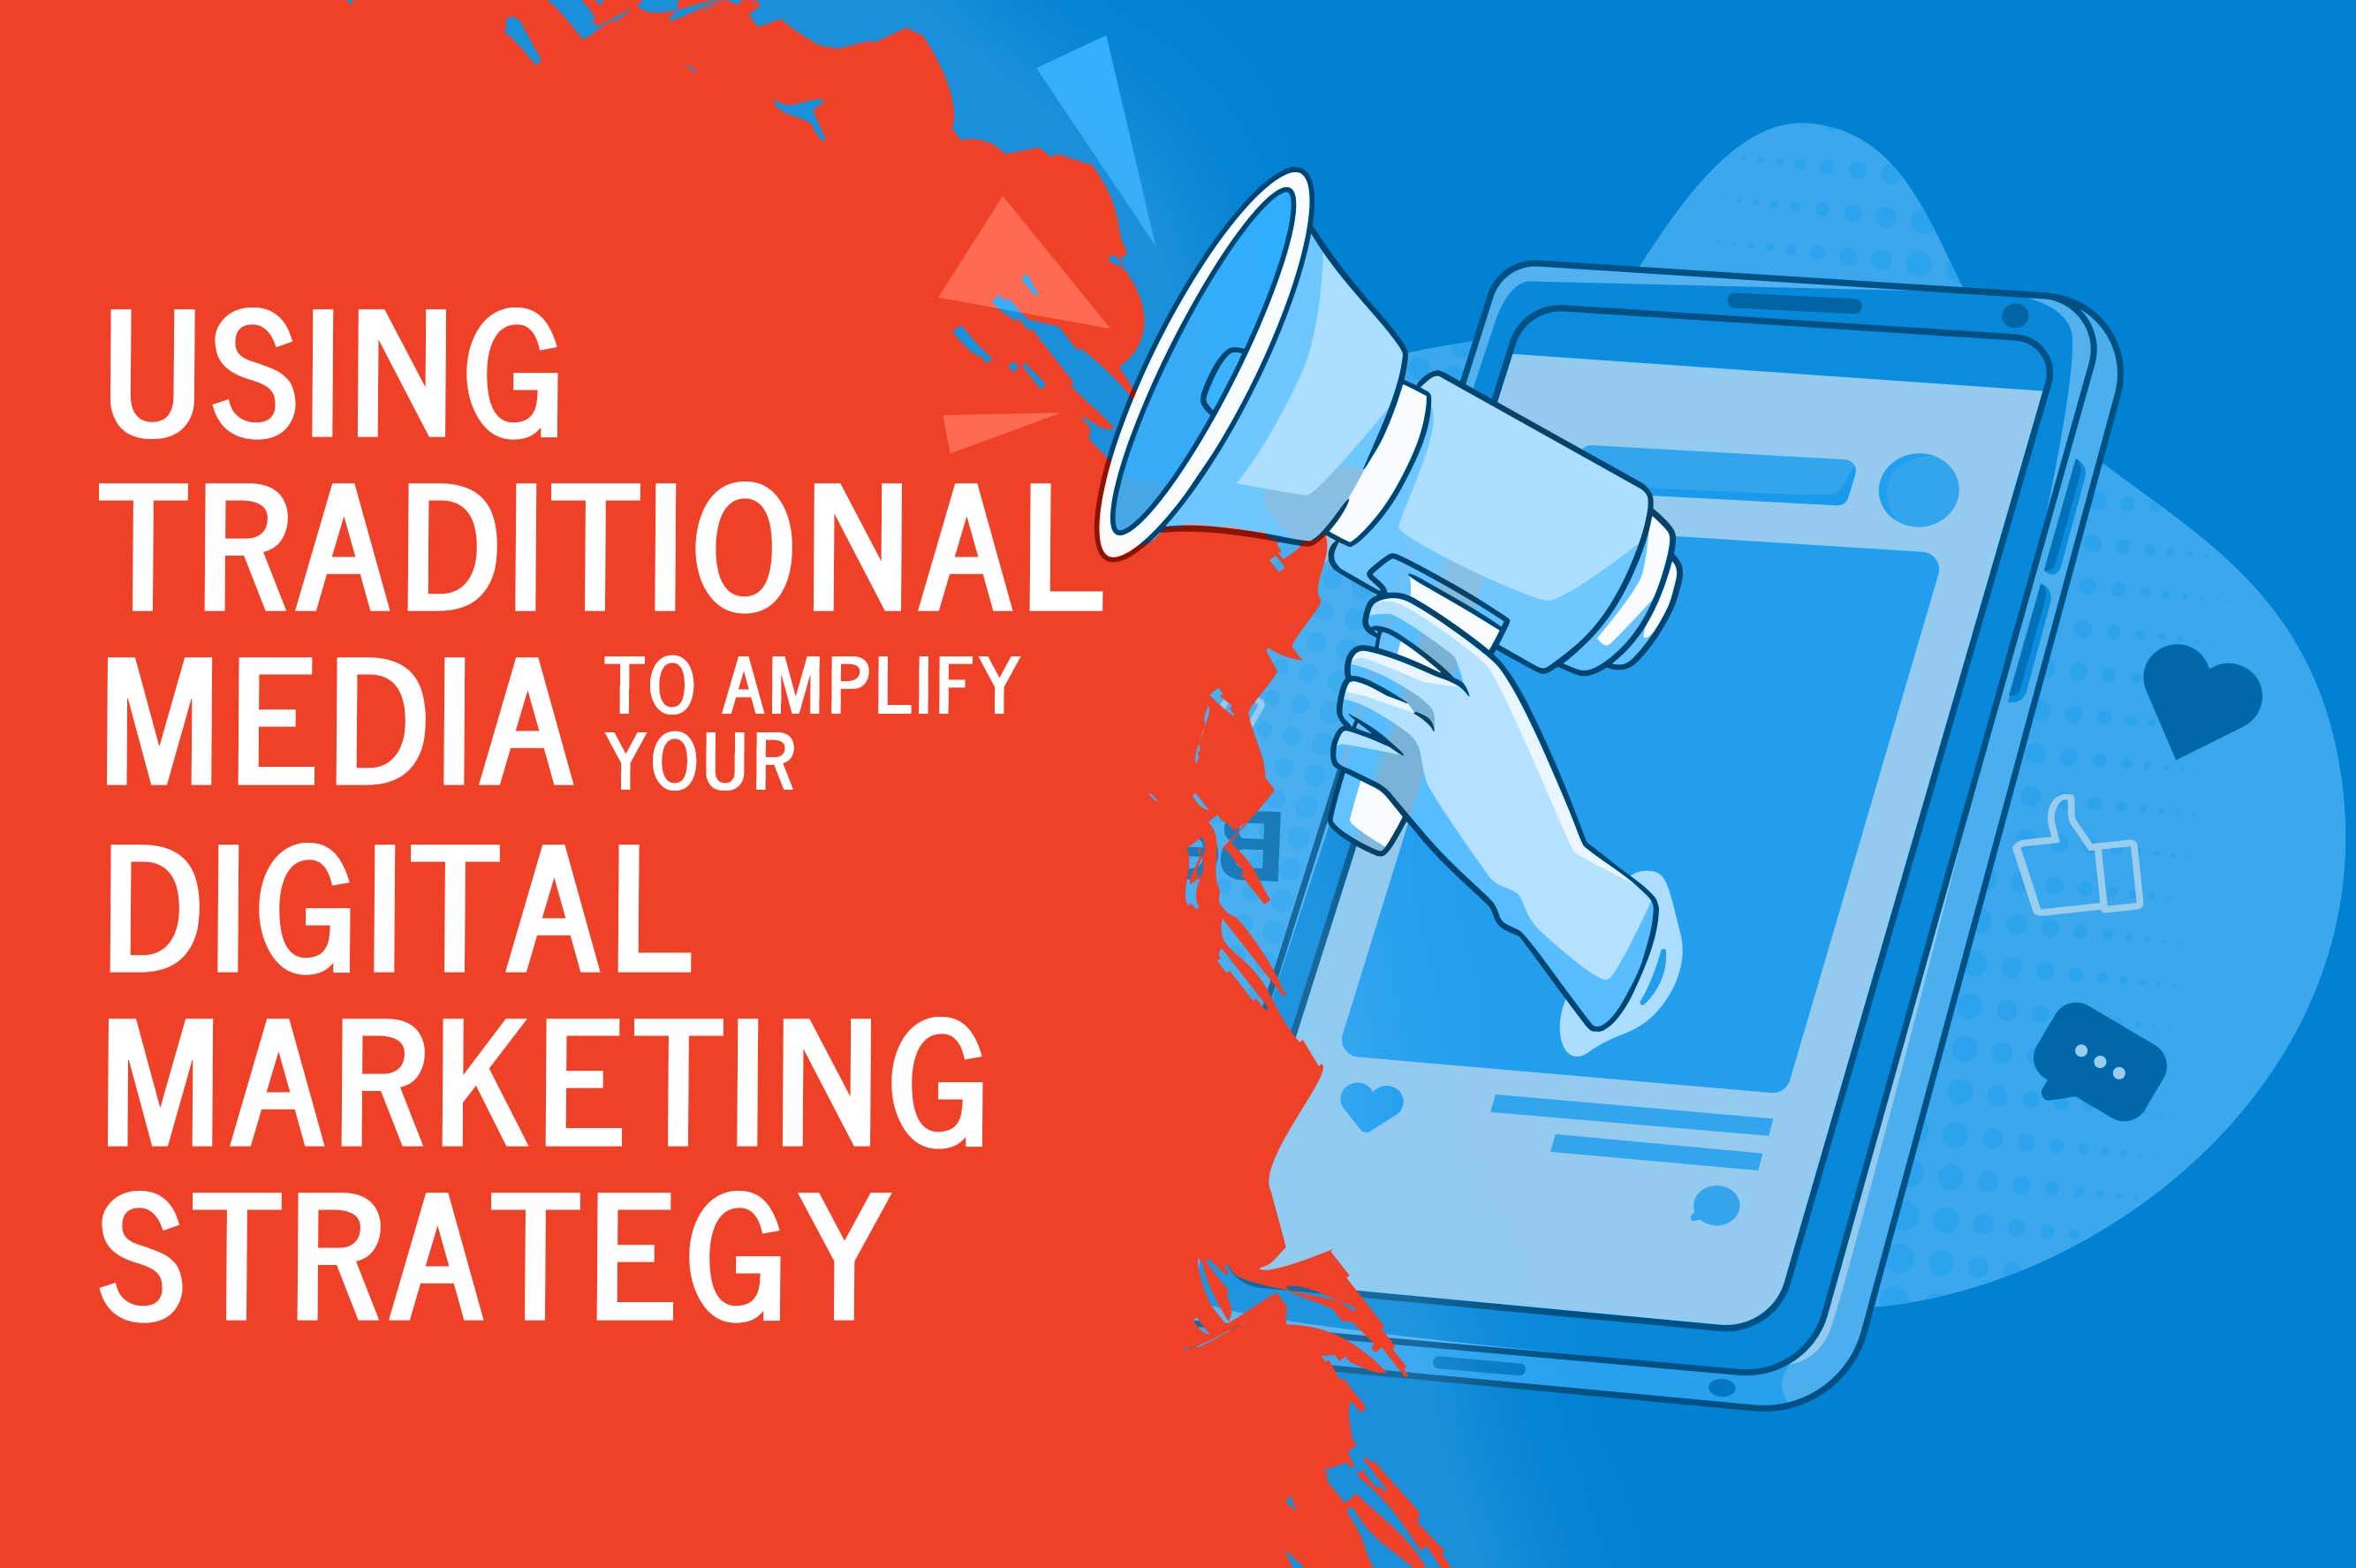 Using Traditional Media to Amplify Your Digital Marketing Strategy